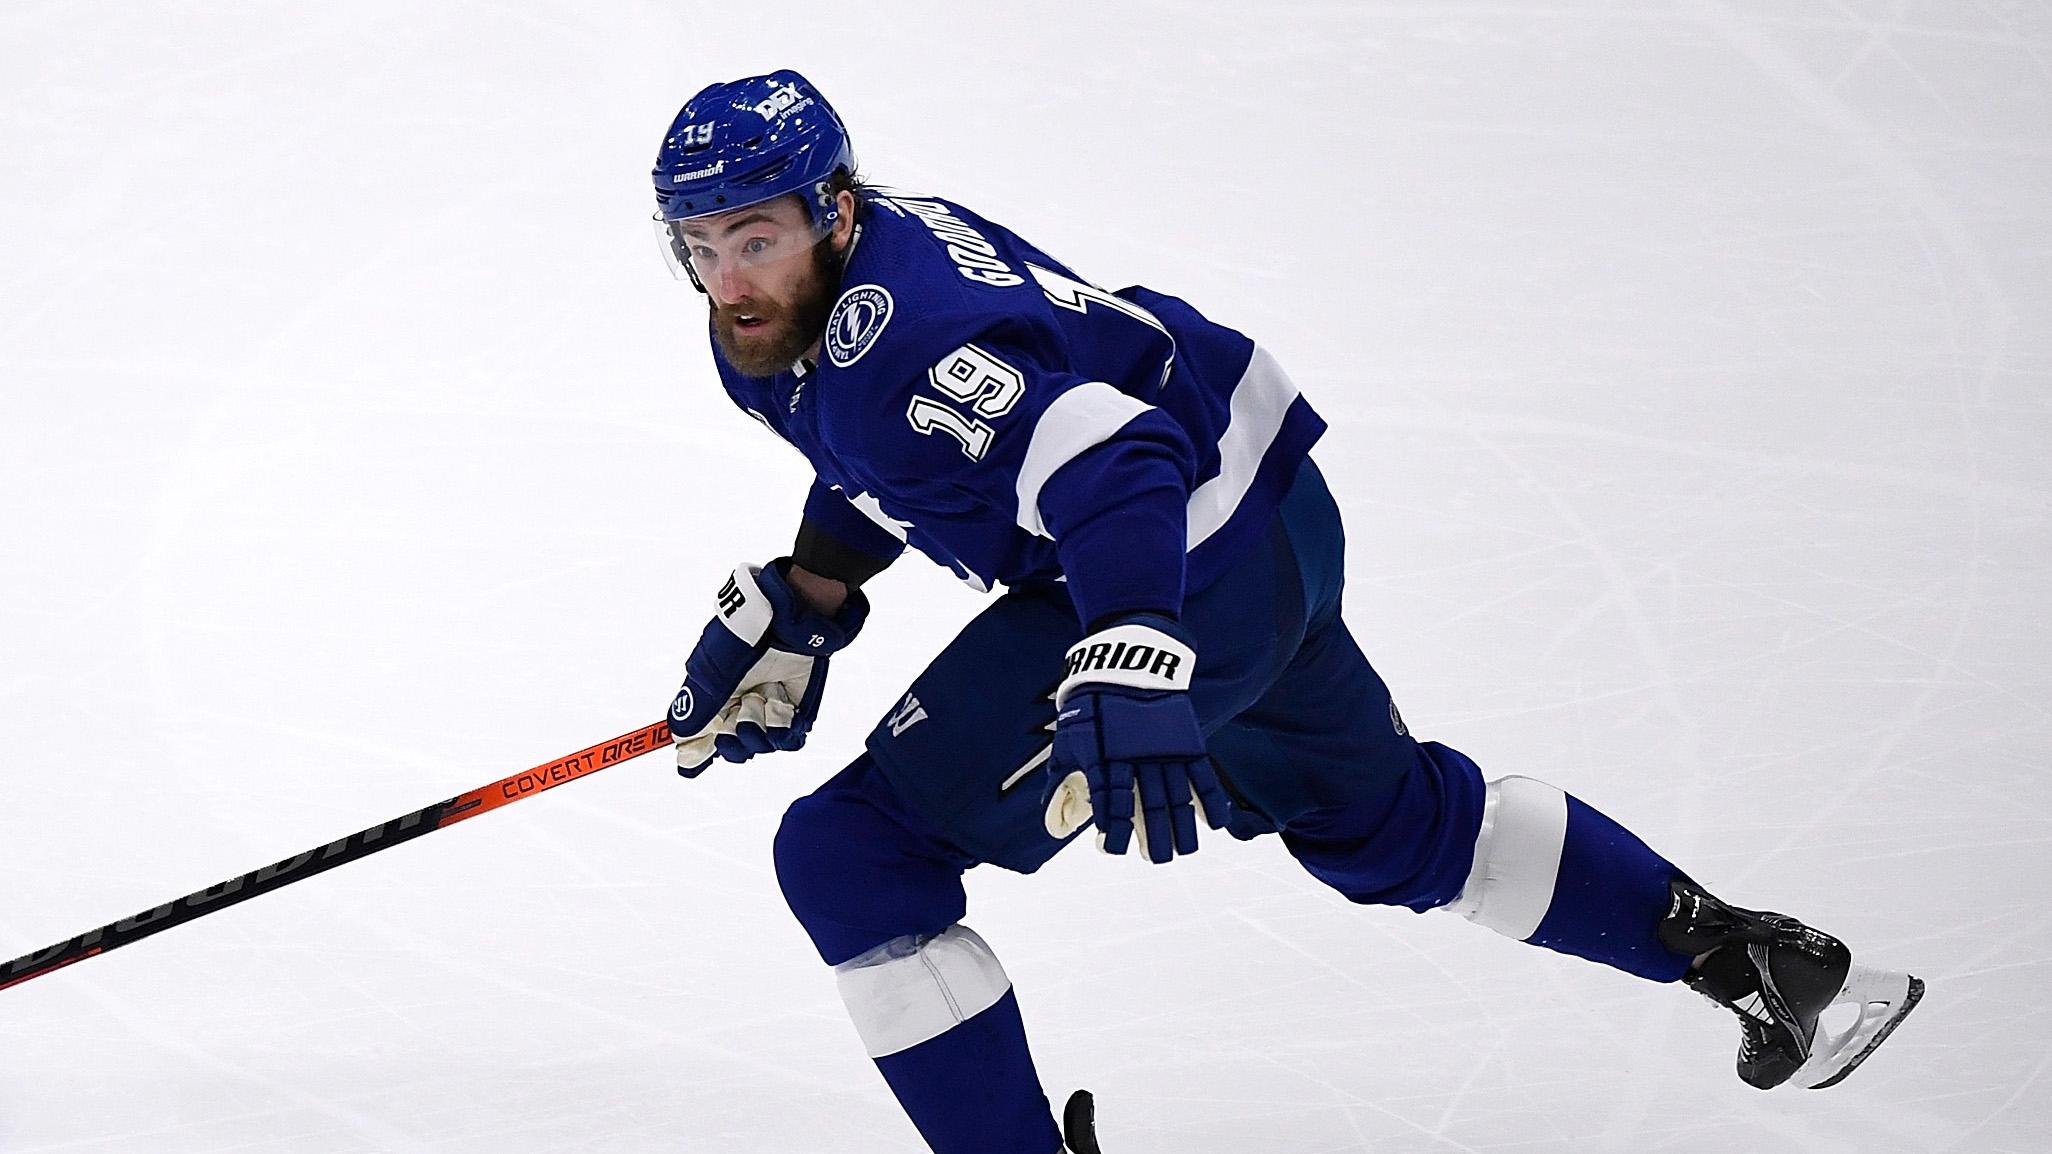 Tampa Bay Lightning right wing Barclay Goodrow (19) controls the puck against the Montreal Canadiens during the second period in game five of the 2021 Stanley Cup Final at Amalie Arena. / Douglas DeFelice-USA TODAY Sports